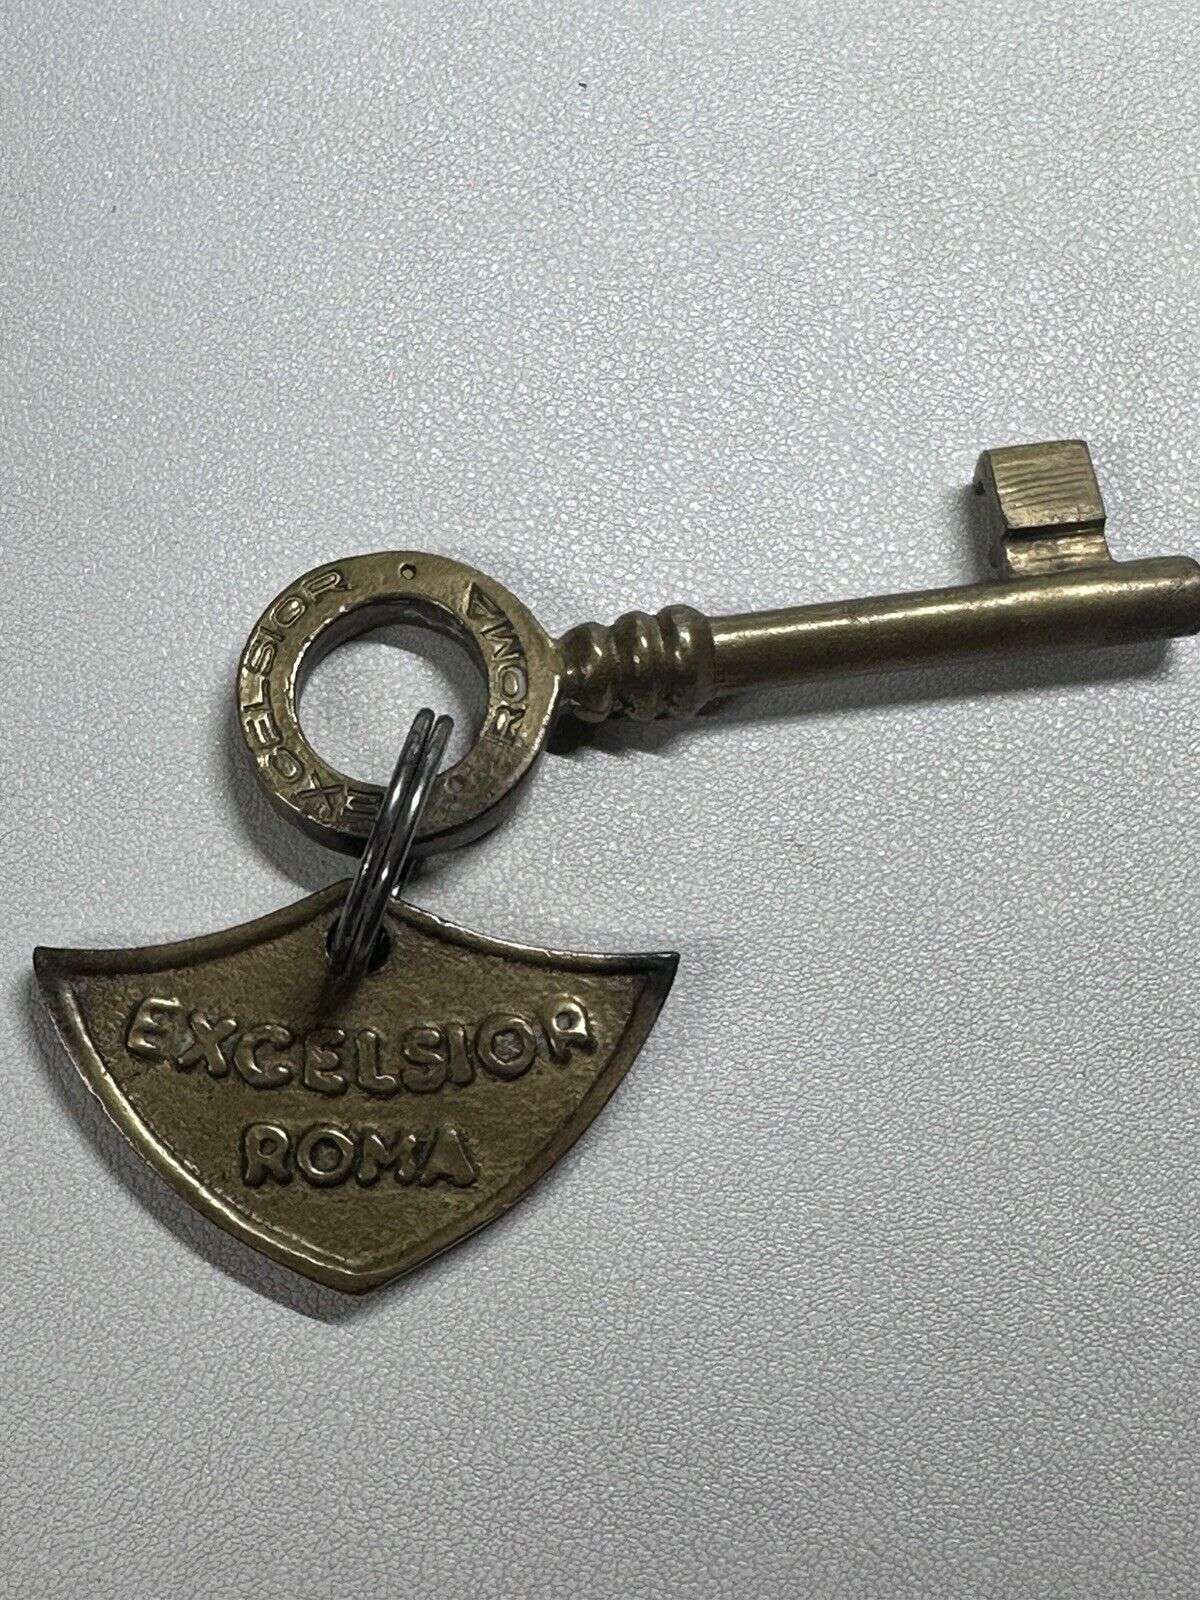 Vintage Brass Hotel Excelsior Roma Italy Room Key Fob Room #459 Solid Large Key